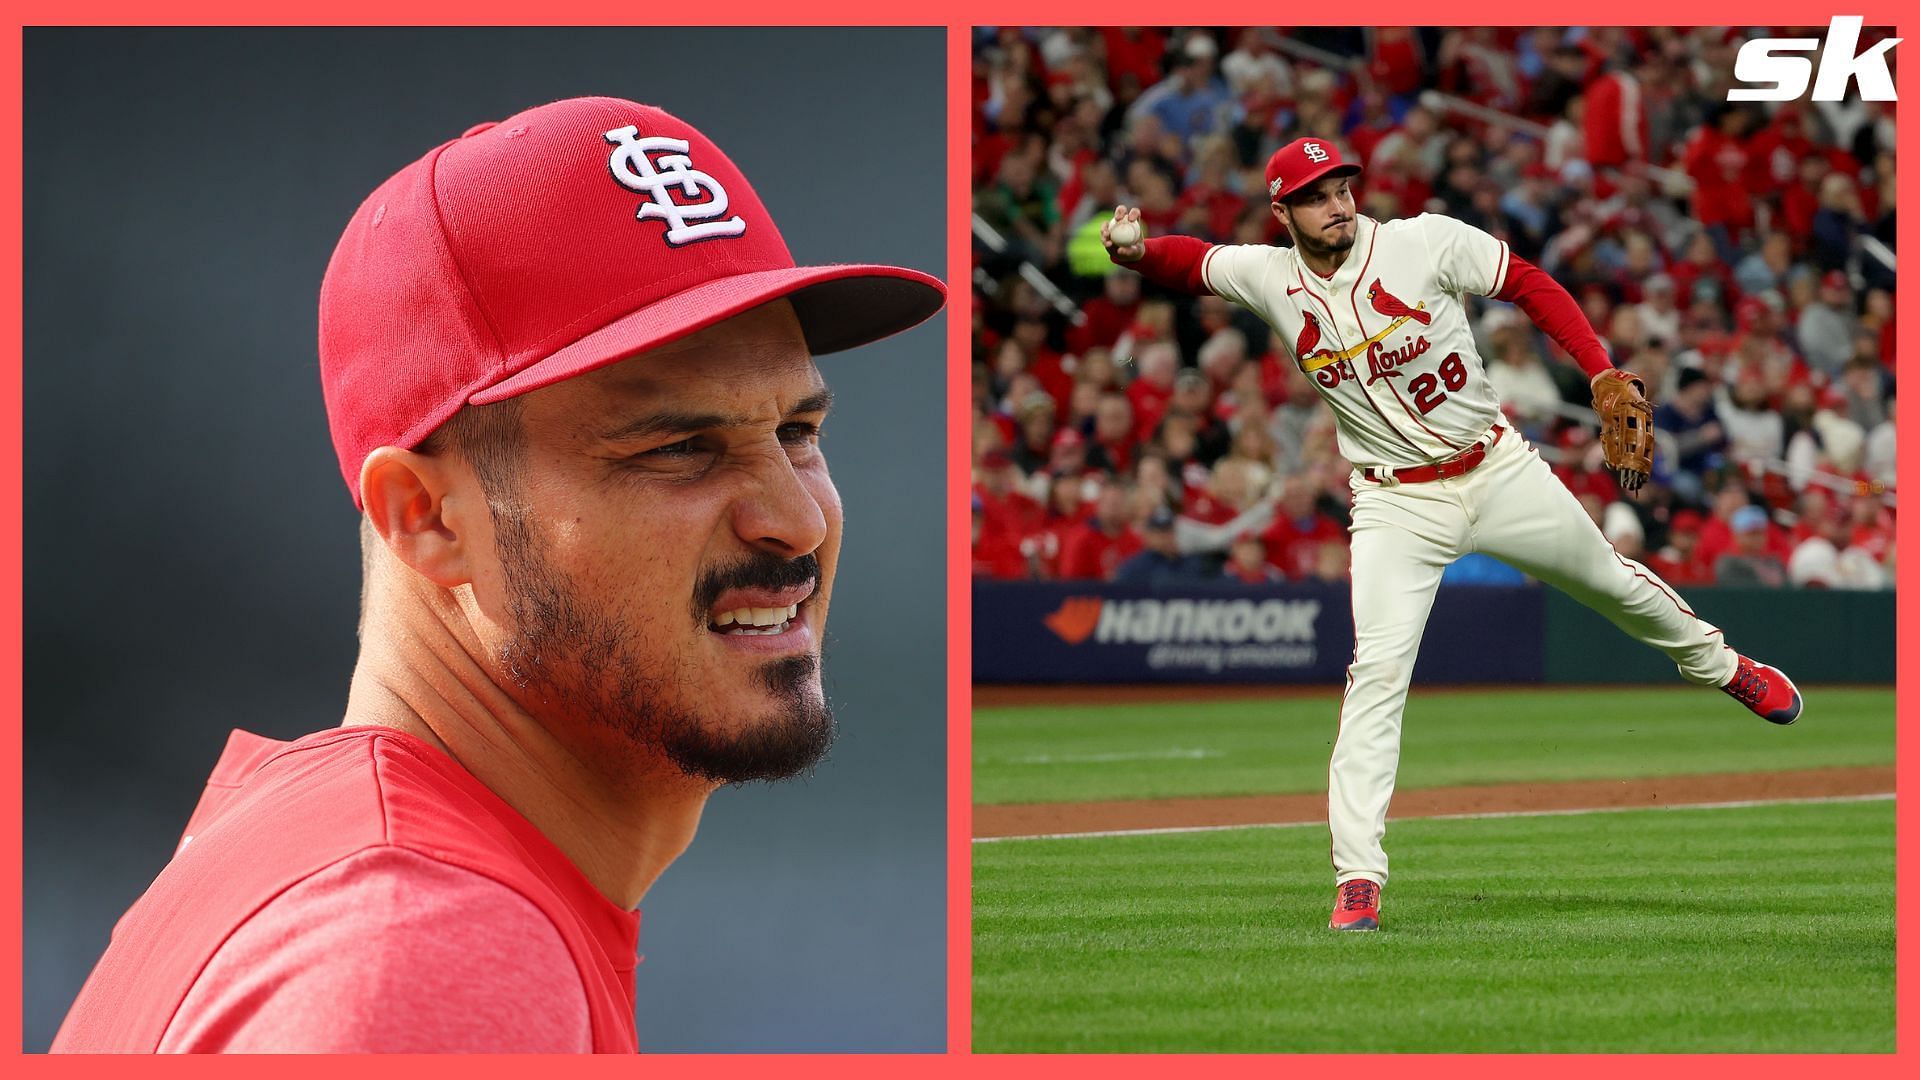 Arenado Wins First Division Title of 10-Year Career as Cardinals